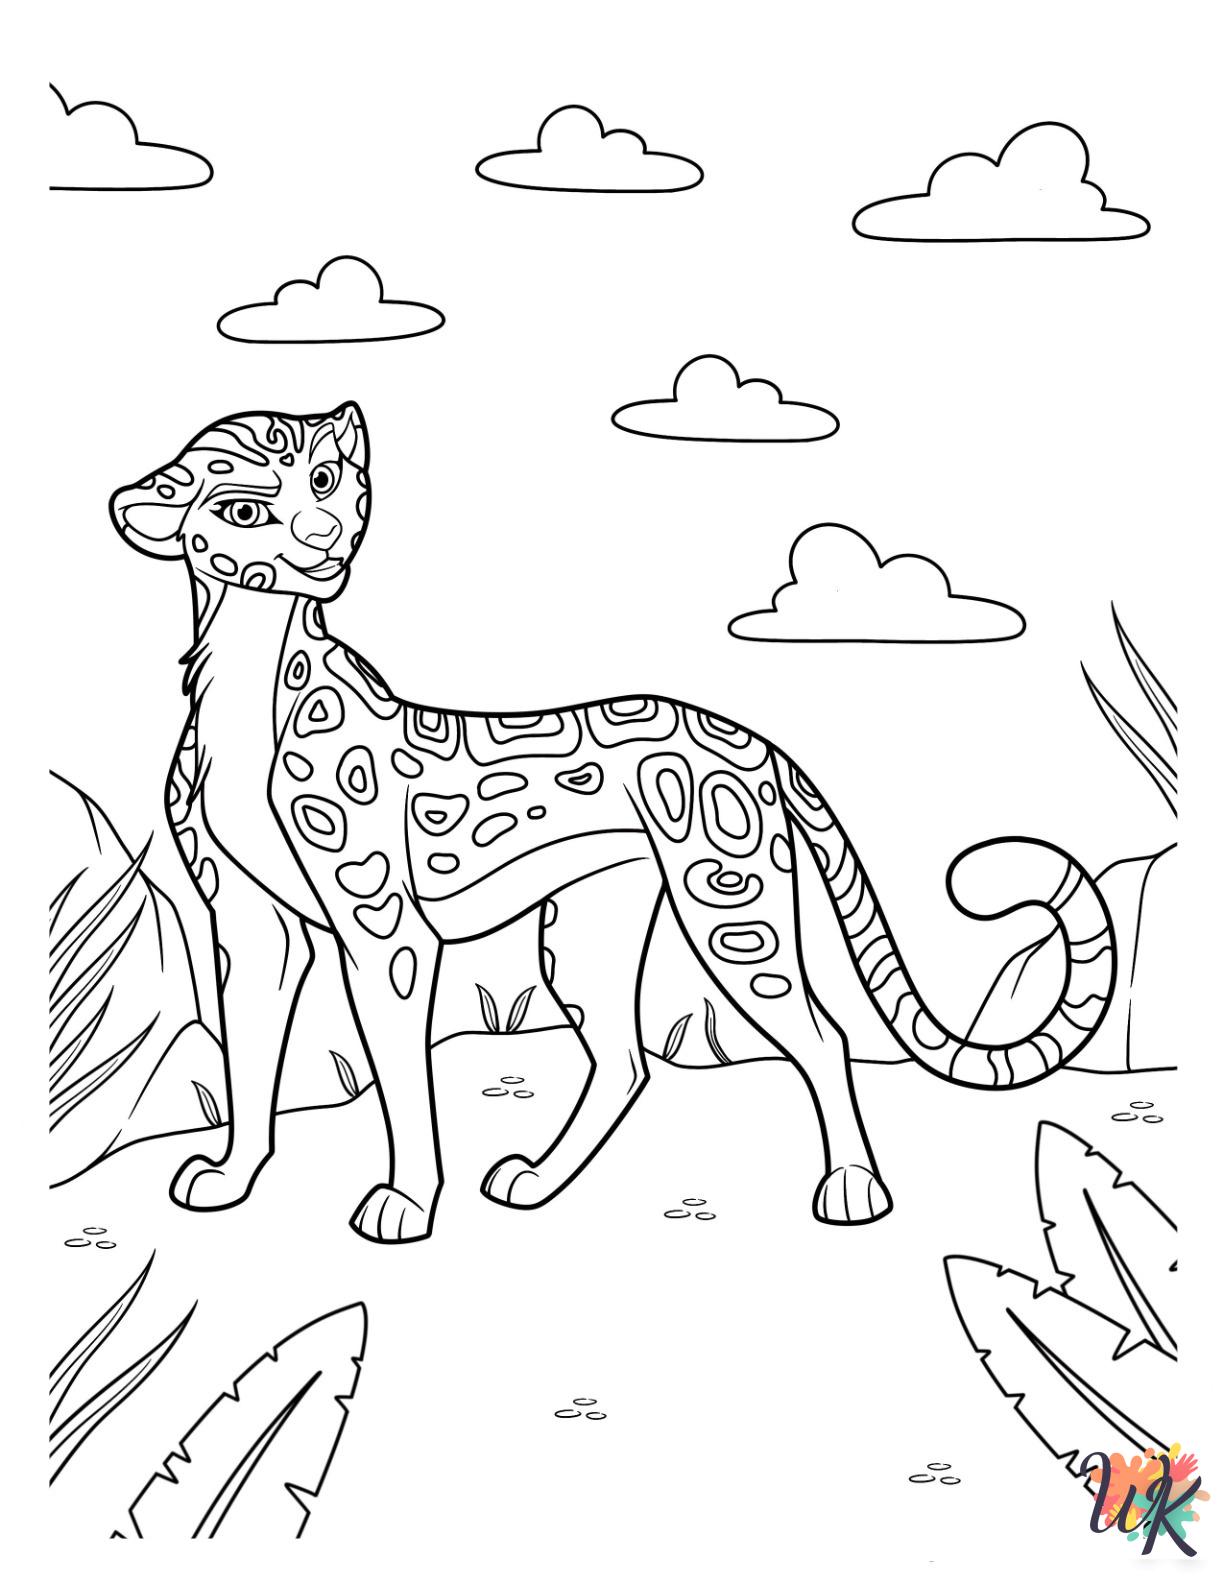 Cheetah coloring pages free 1